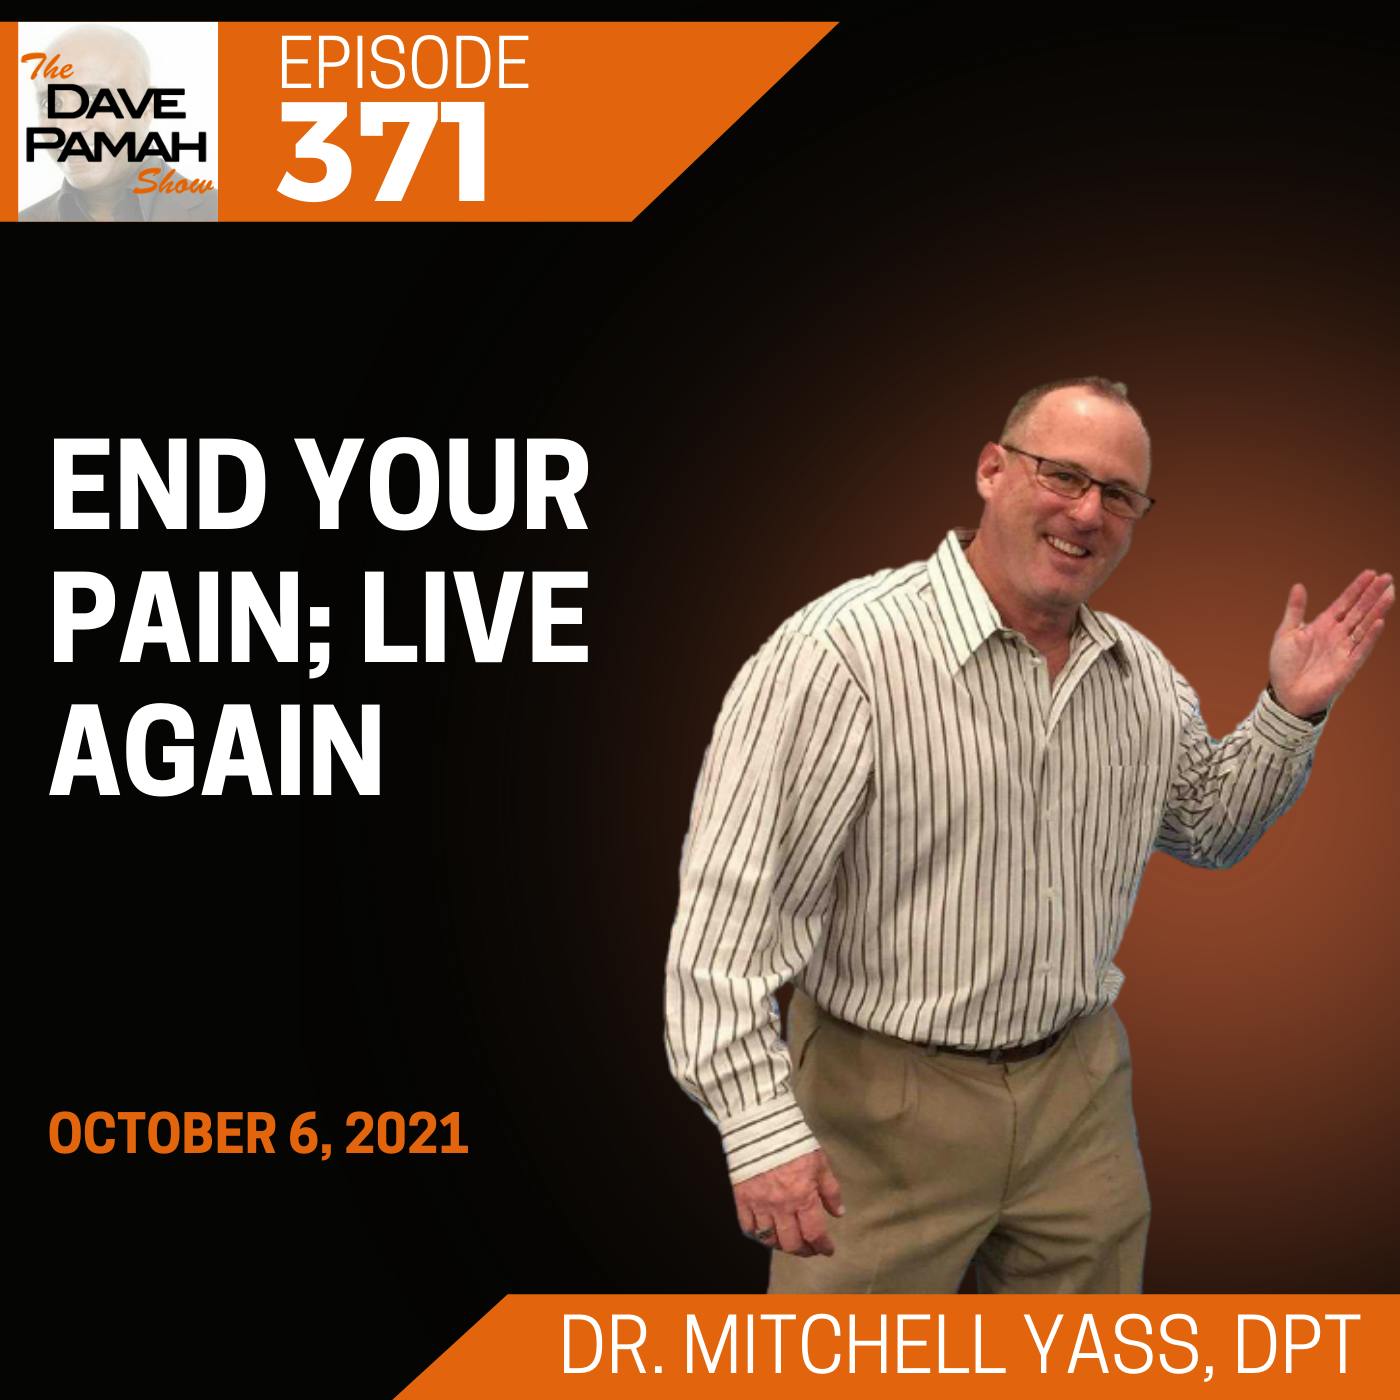 End your pain; live again with Dr. Mitchell Yass, DPT Image